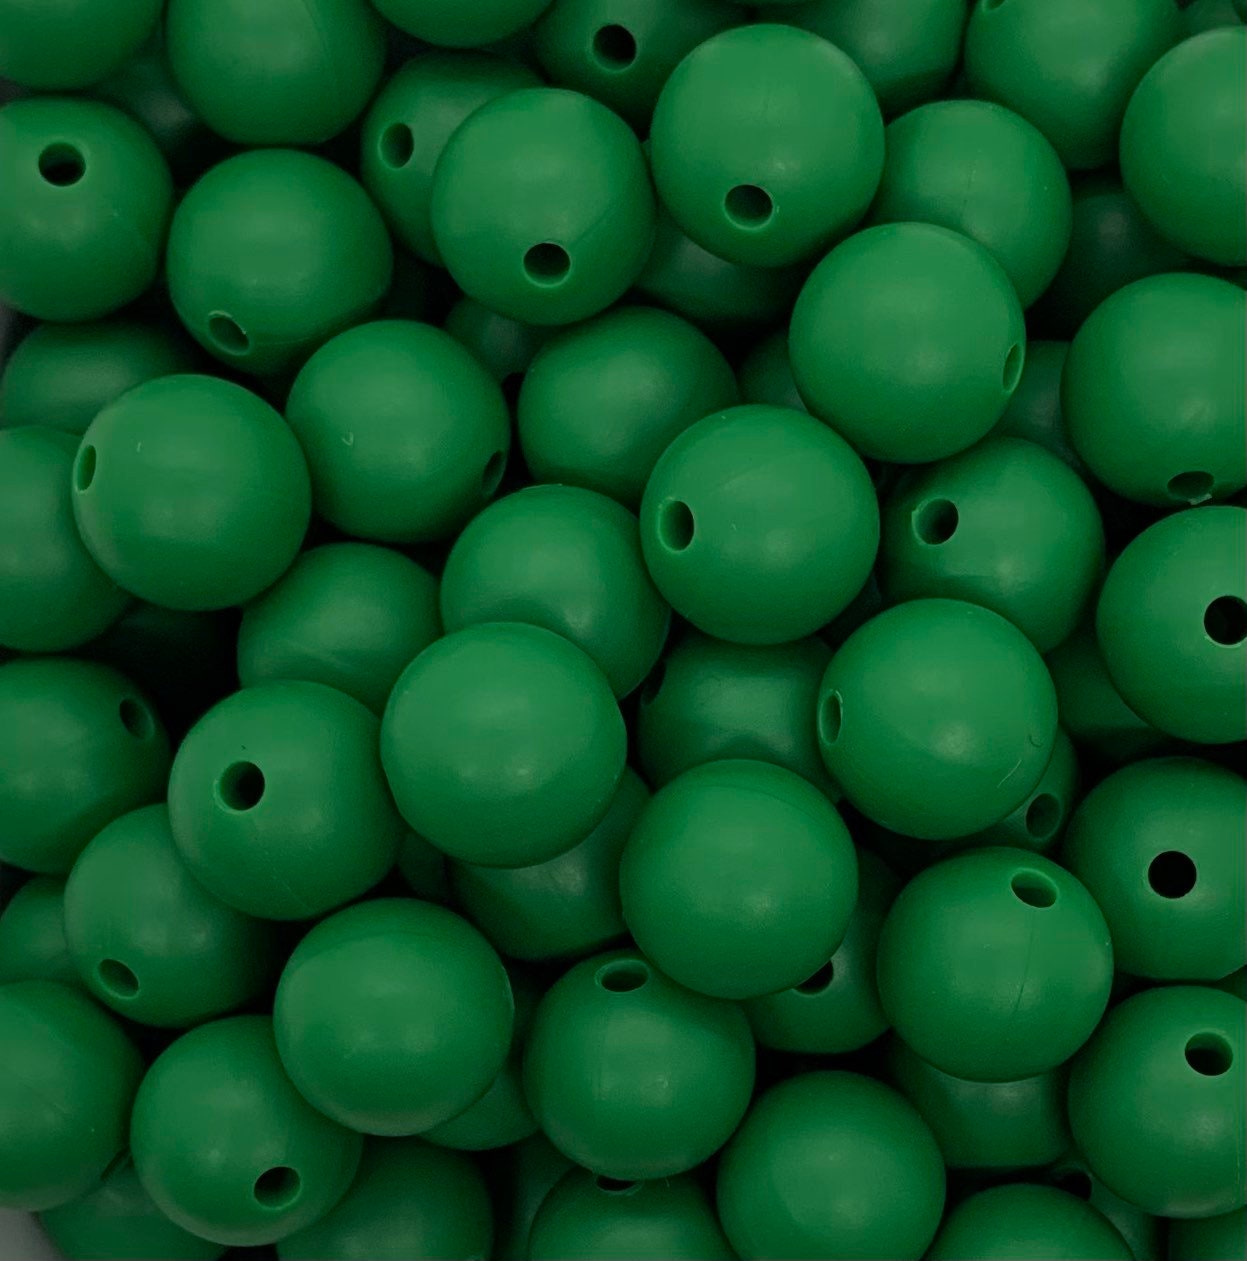 12mm Deep Green Silicone Beads, Silicone Beads in Bulk, 12mm